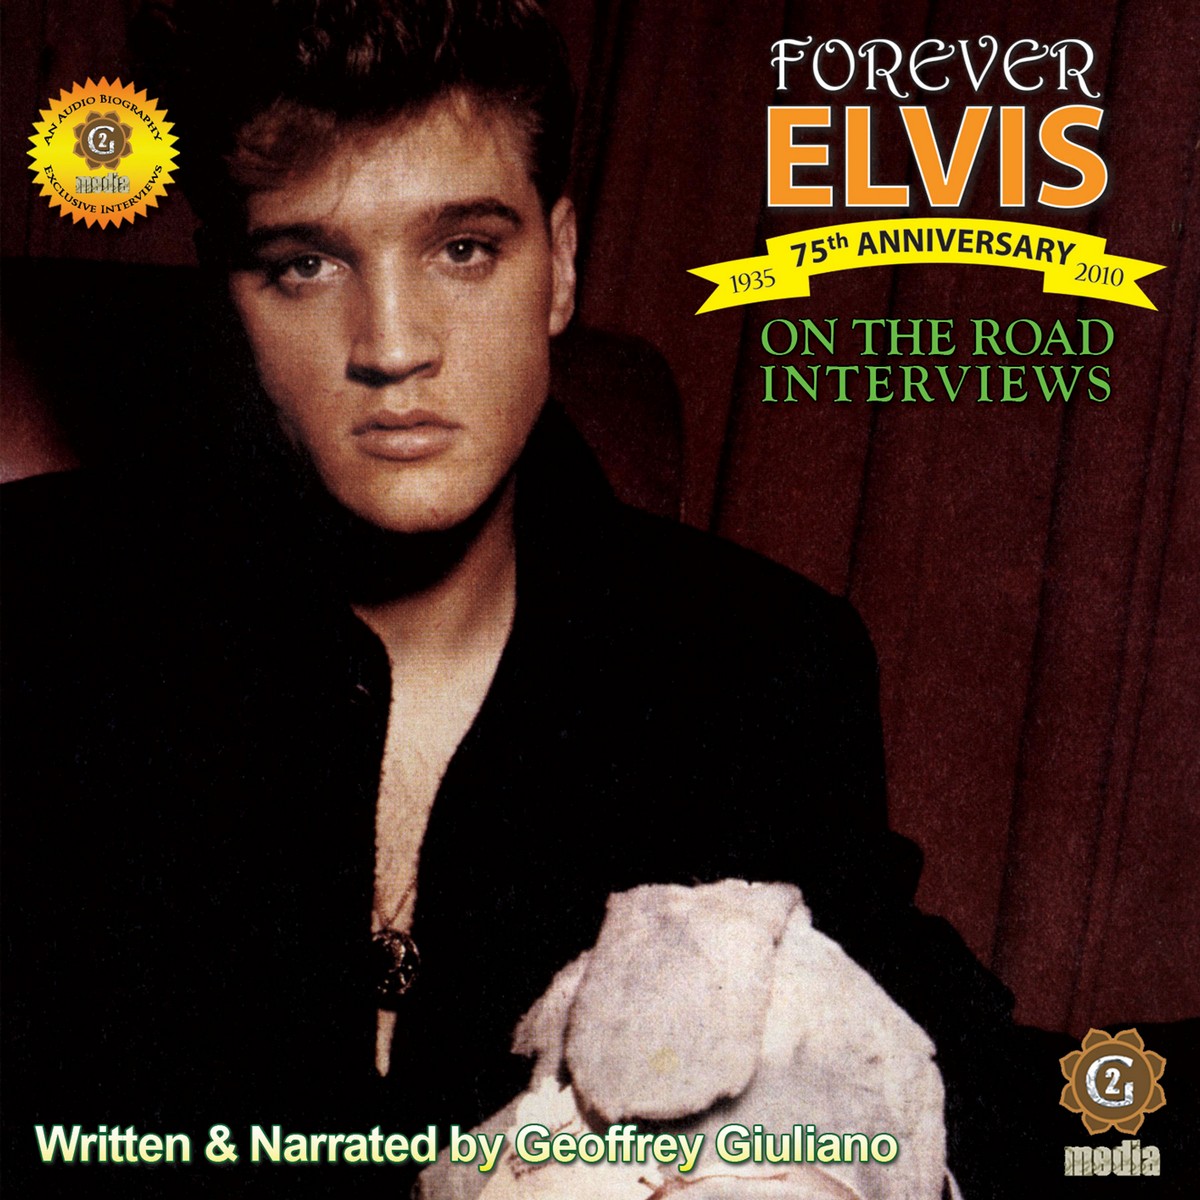 On the Road Interviews – Forever Elvis